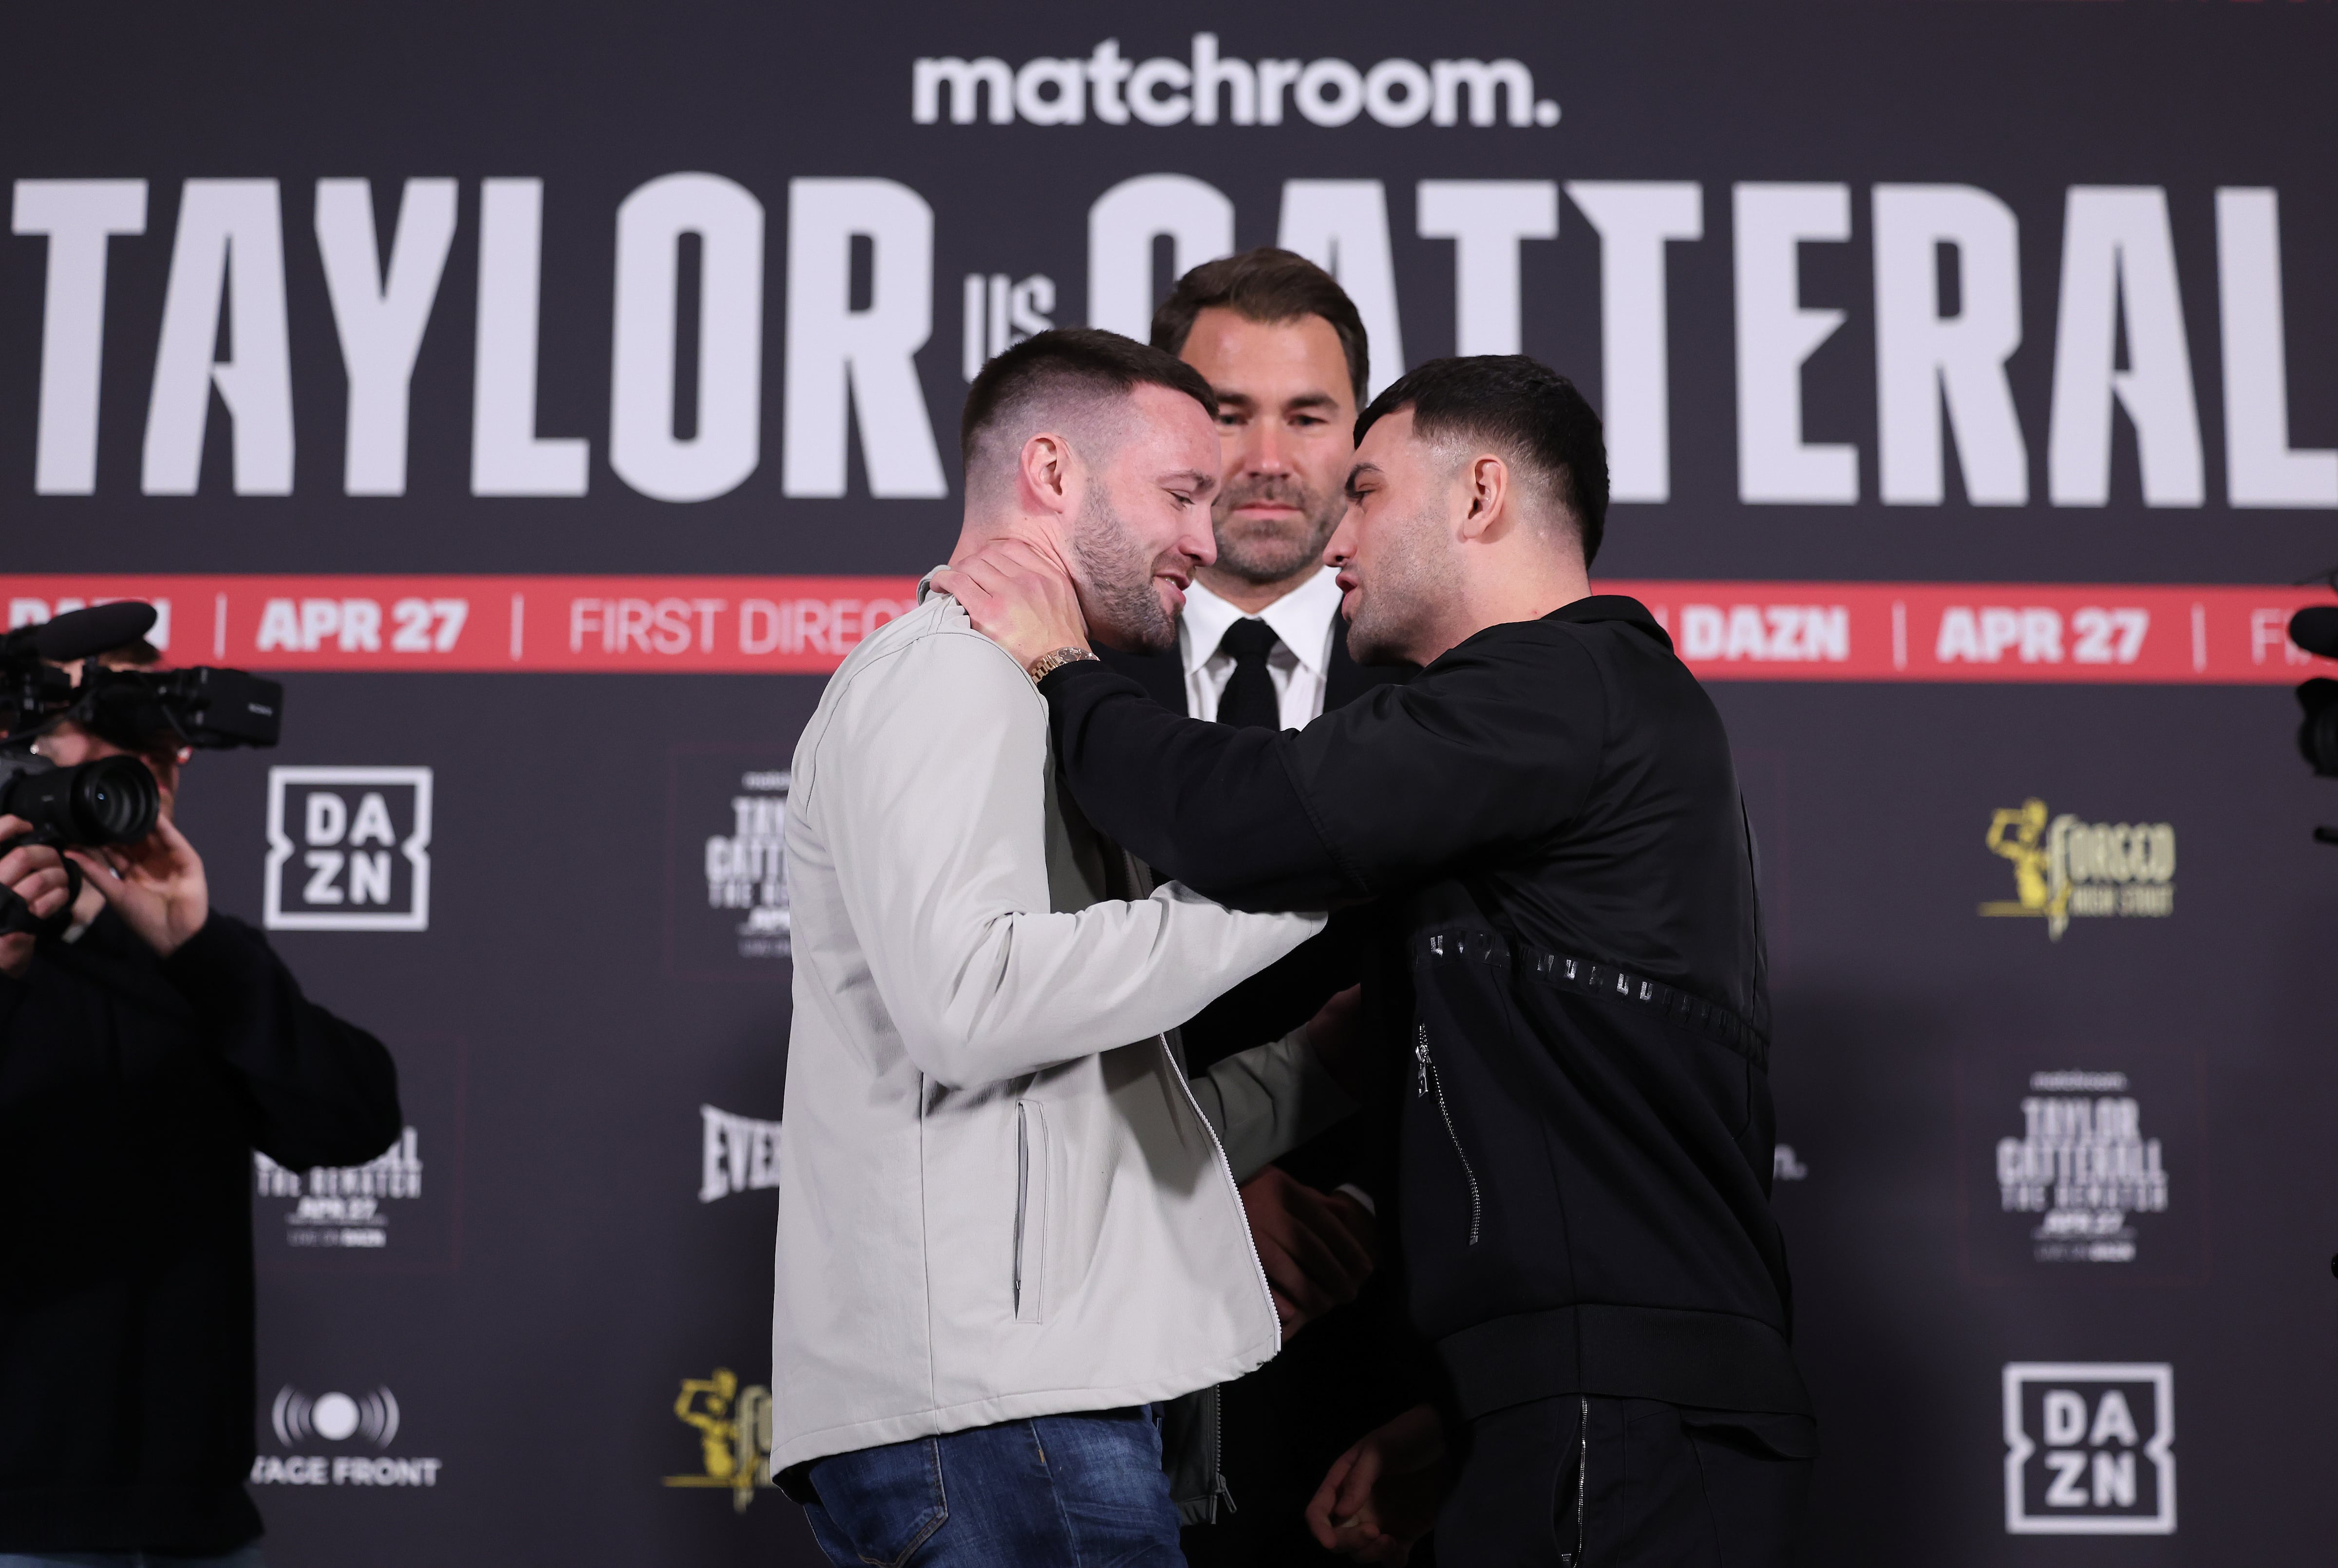 Taylor and Catterall separated after heated confrontation